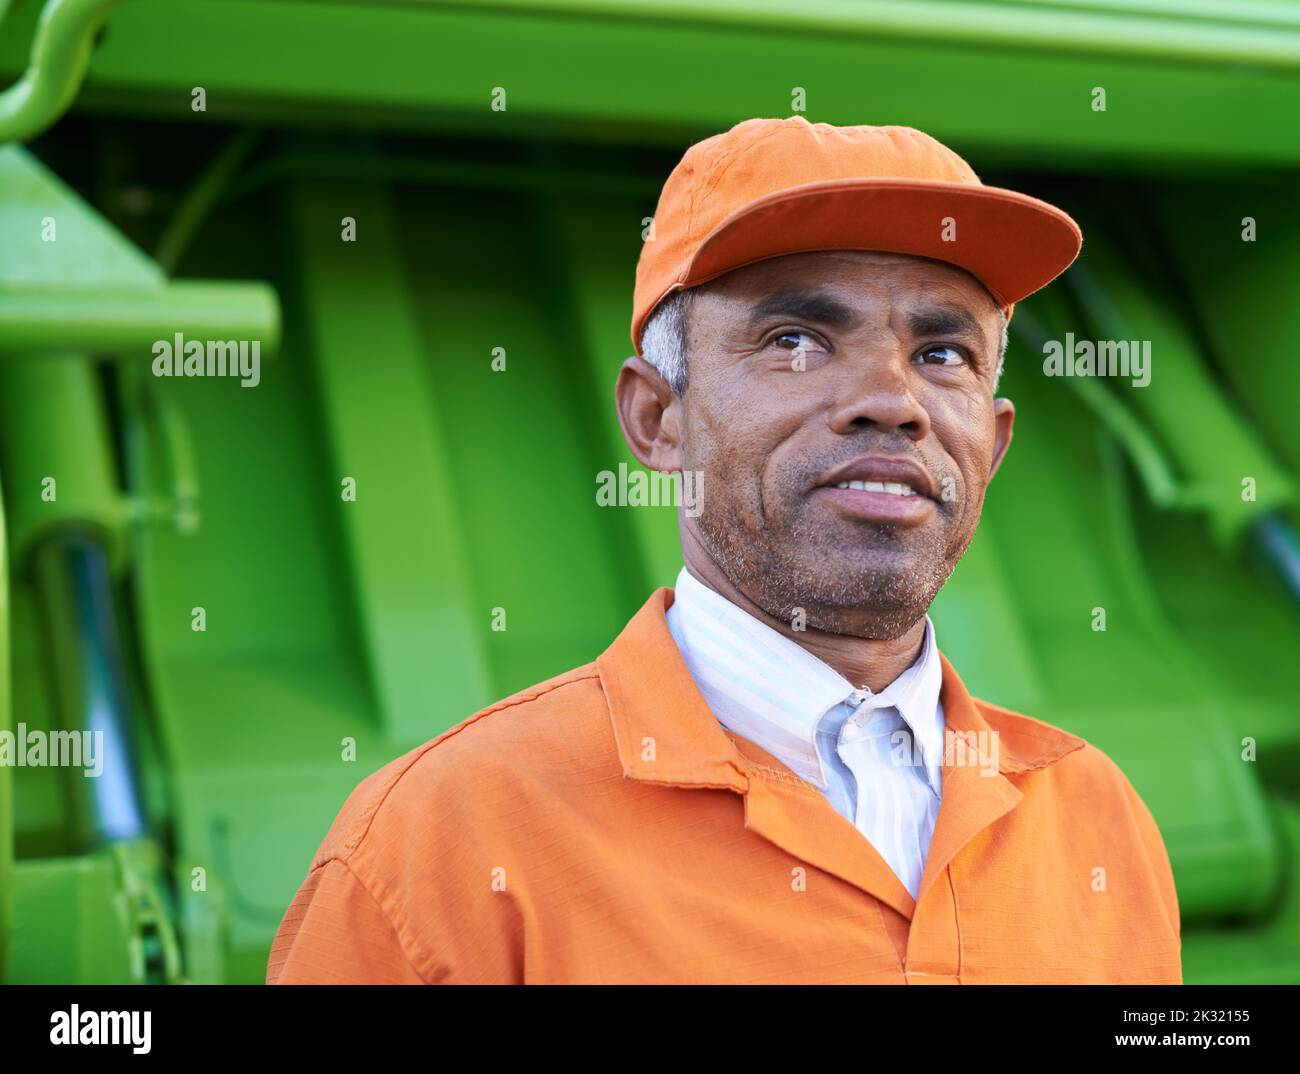 Hes keeping our streets clean. a male worker on garbage day. Stock Photo